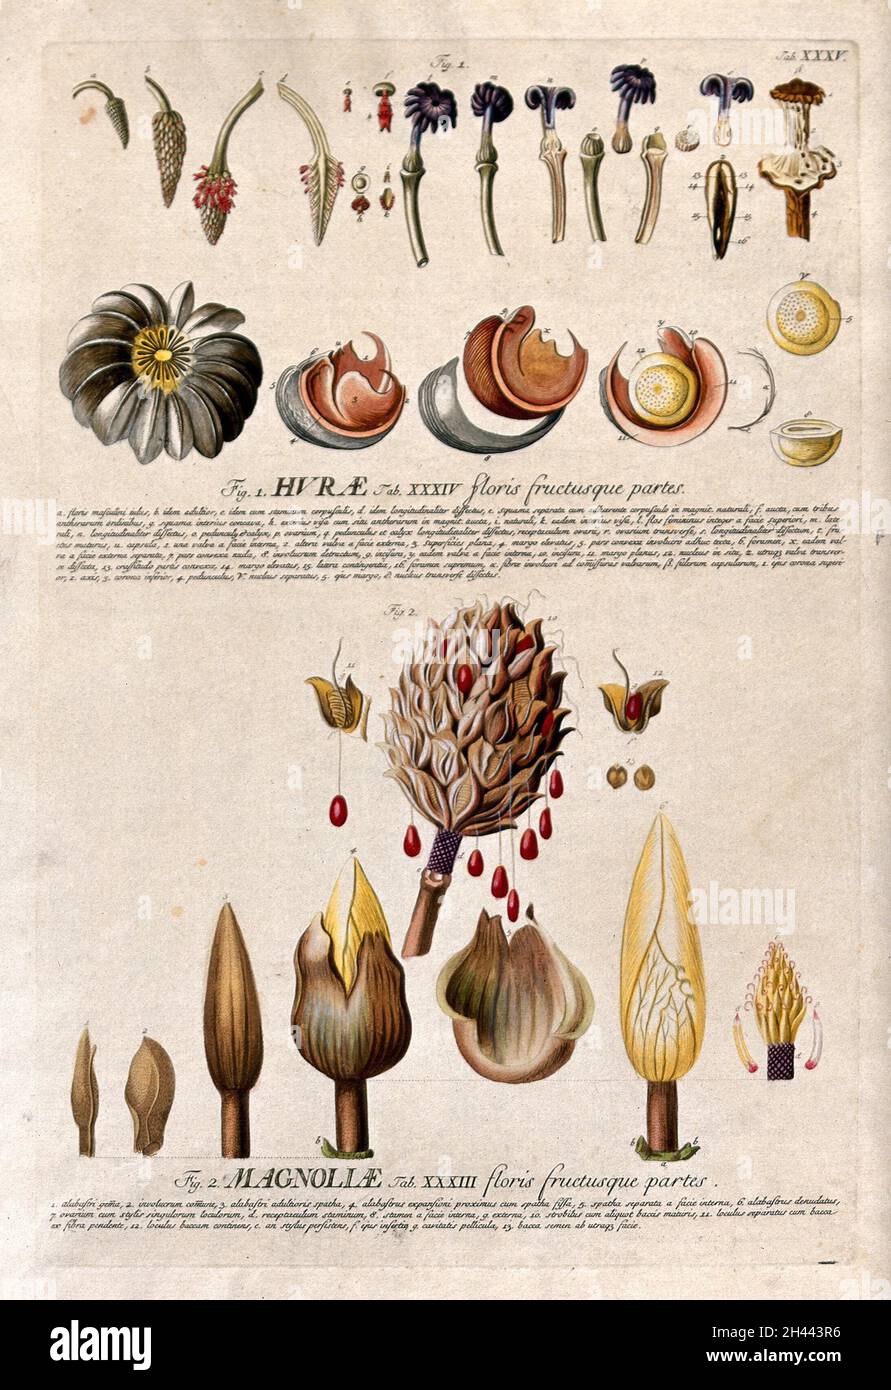 Huru (Hura crepitans L.) and bull bay (Magnolia grandiflora L.): detailed flower and fruit segments with description. Coloured engraving by J.J. or J.E. Haid, c.1750, after G.D. Ehret. Stock Photo